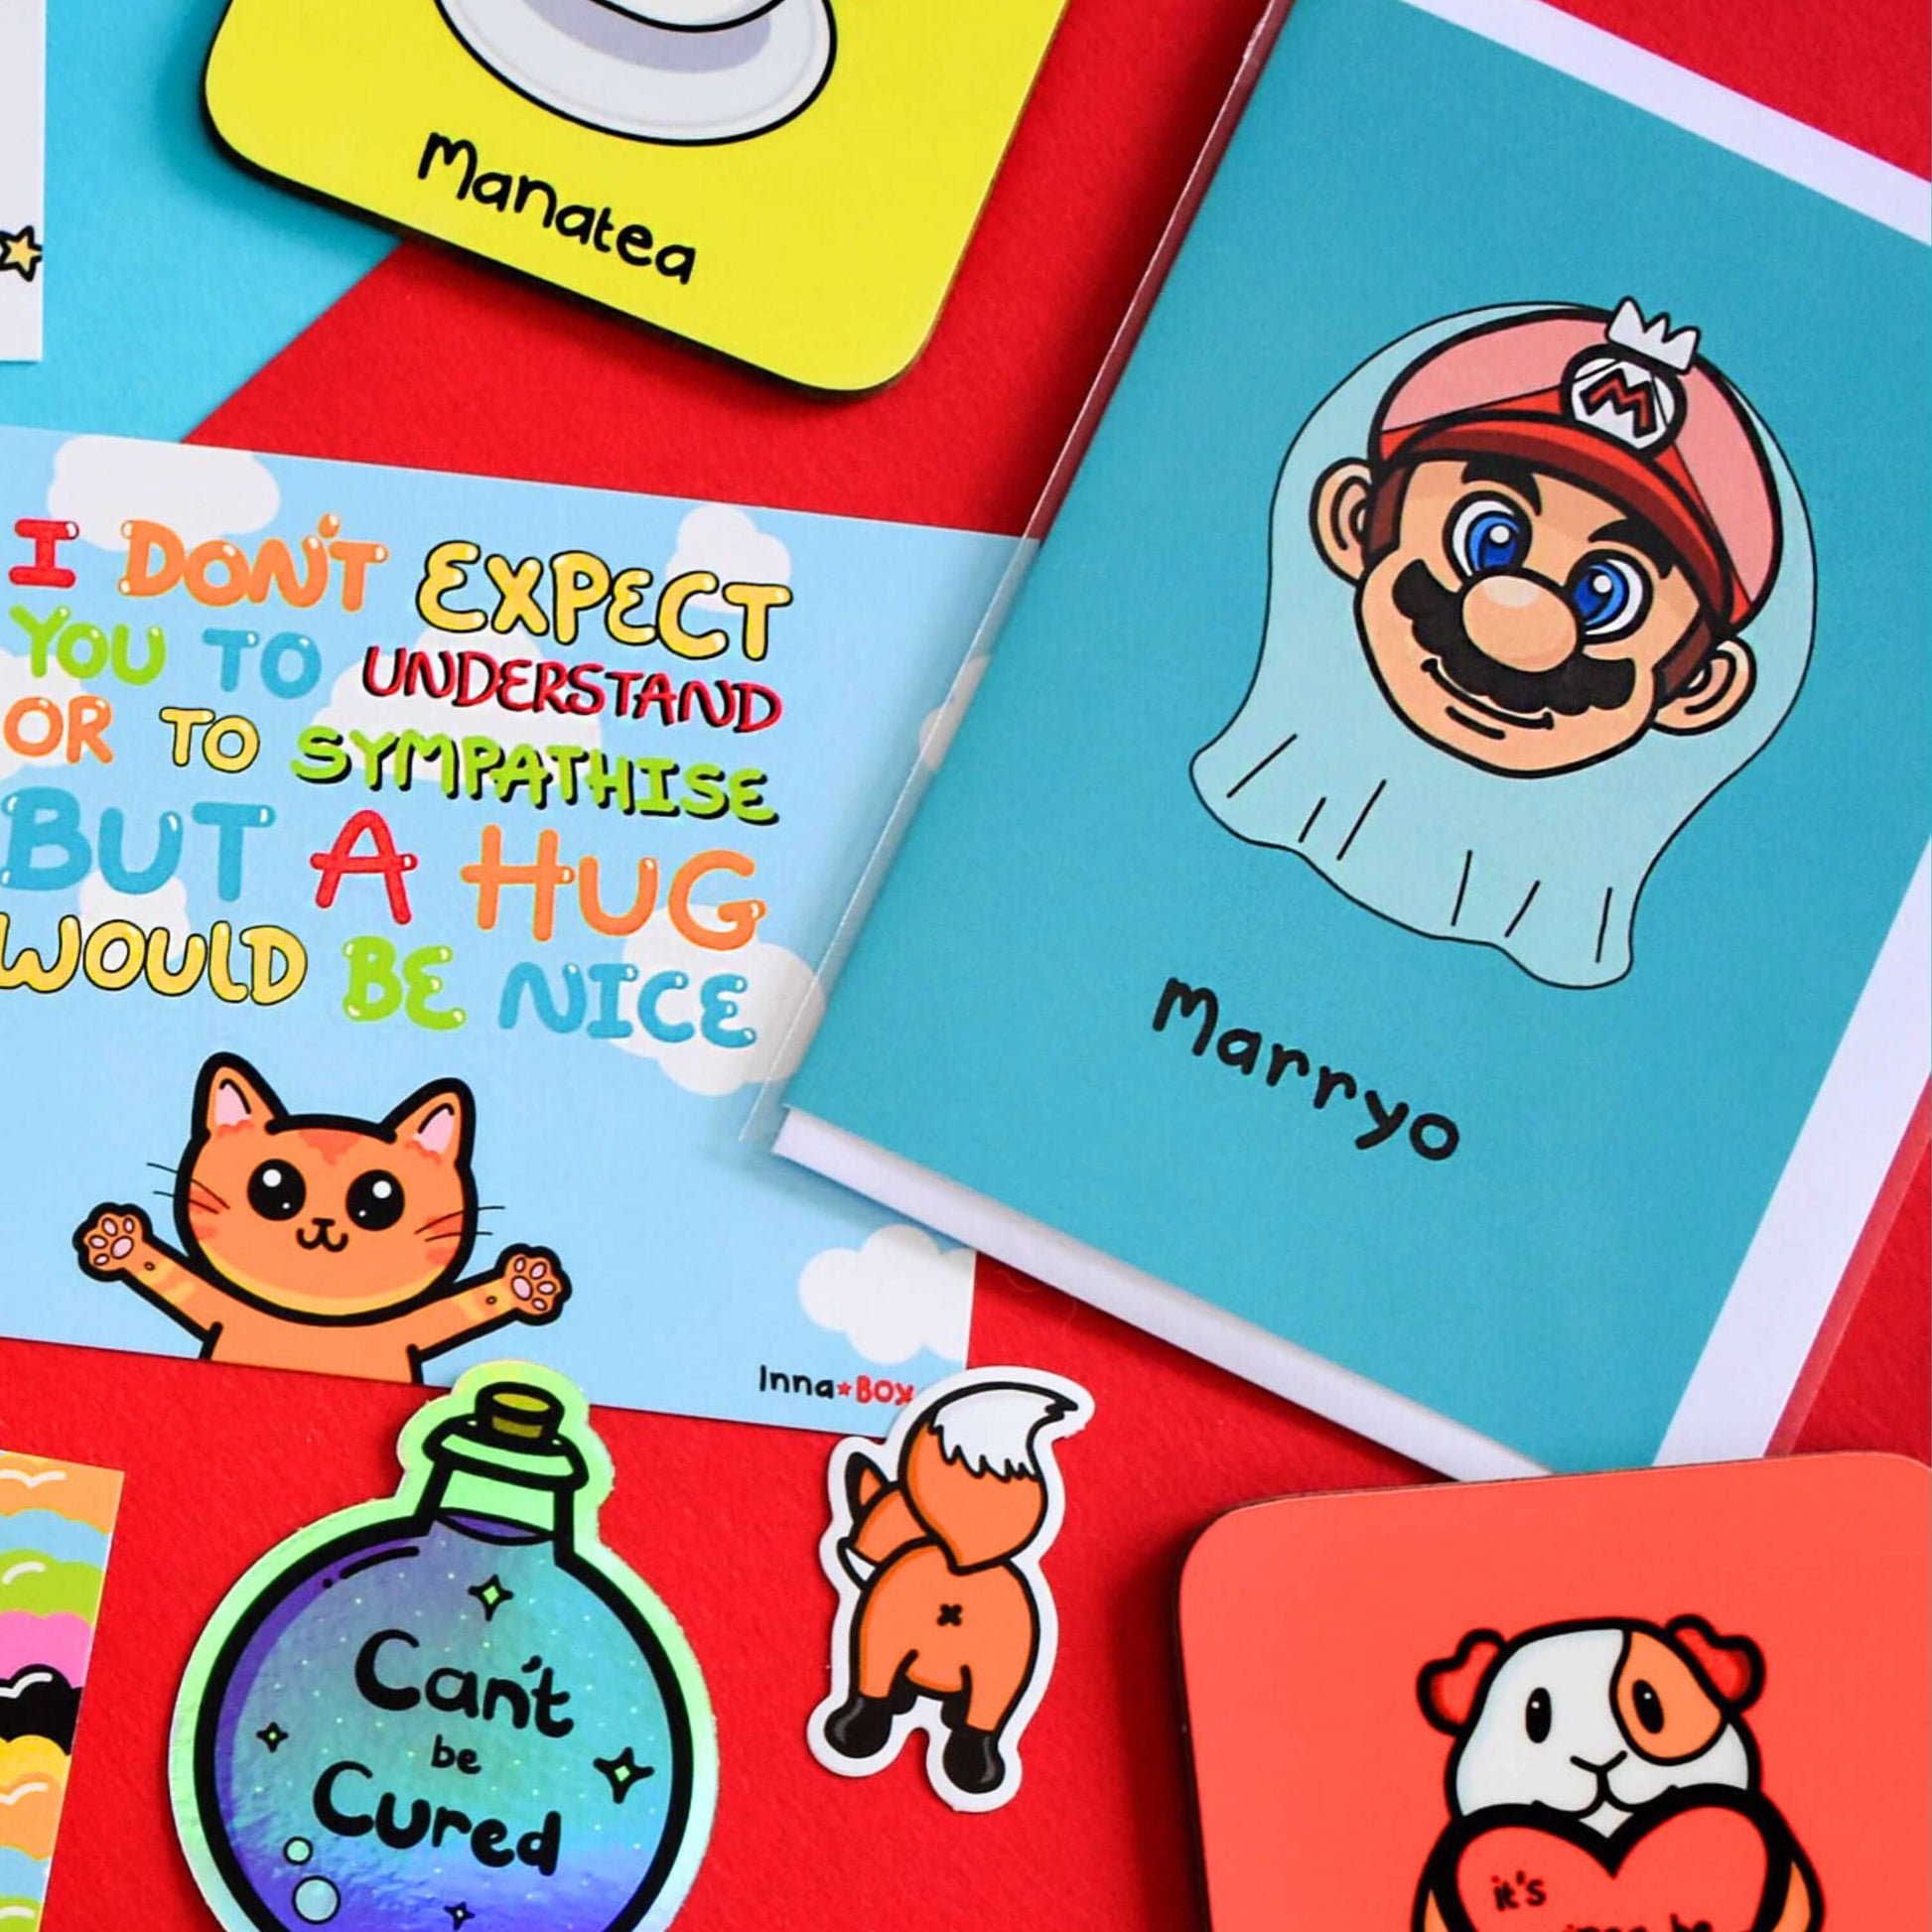 The Marryo - Mario Engagement Wedding Card on a red background with other innabox products. The blue a6 congratulations card features a smiling nintendo mario character head wearing a white bridal wedding veil, underneath him is black text reading 'Marryo'.